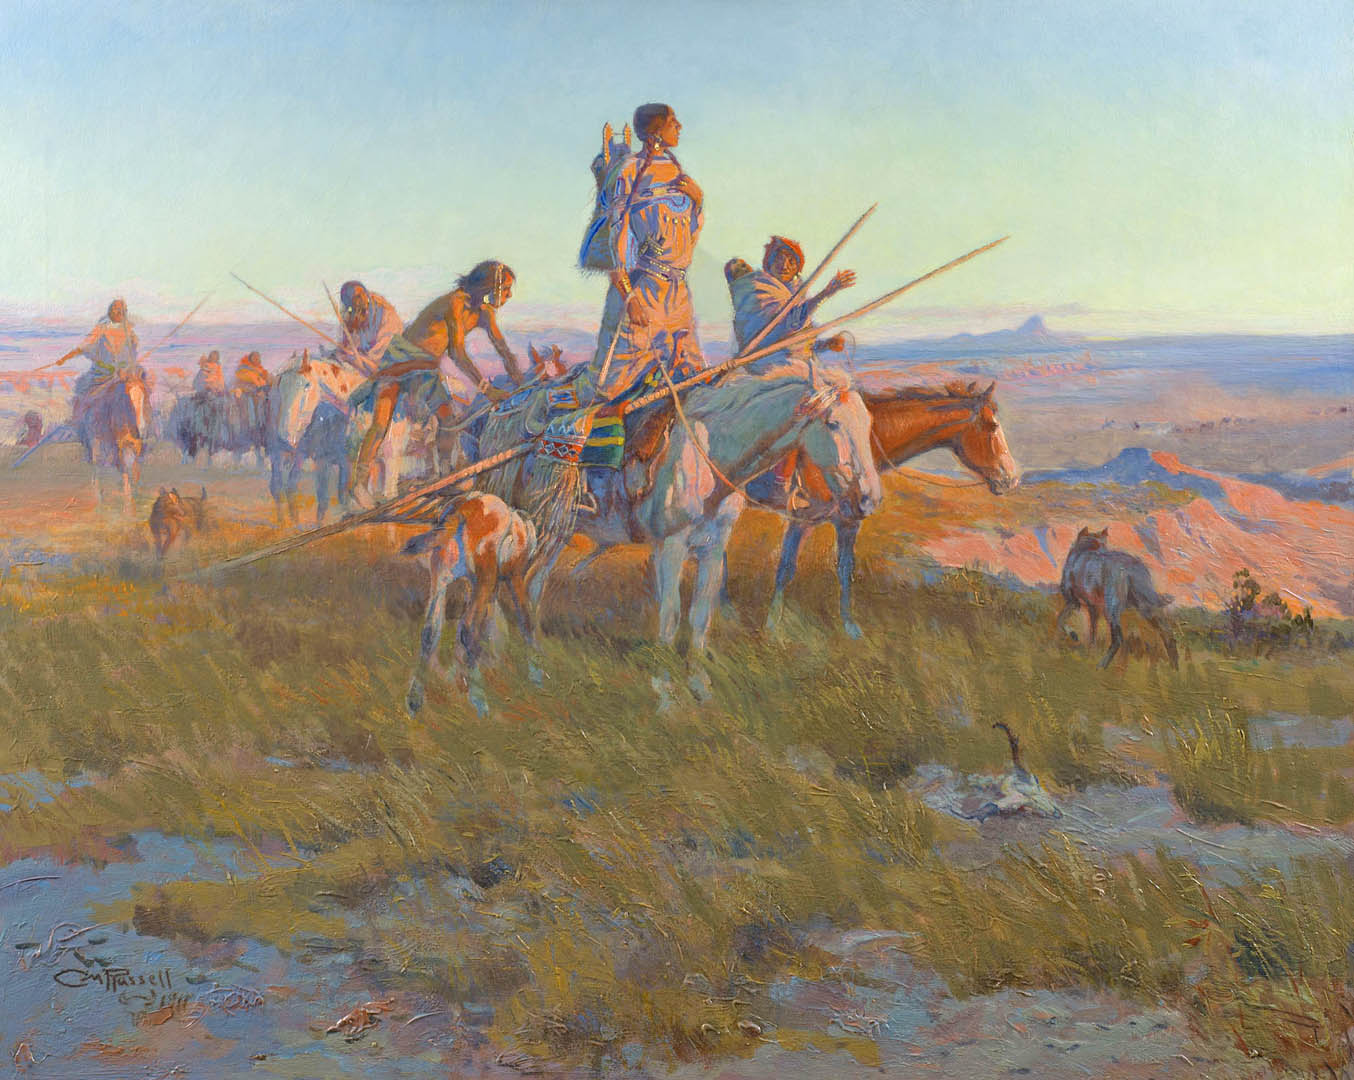 In the Wake of the Buffalo Runners, Charles M. Russell, 1911, Oil on canvas, Private Collection